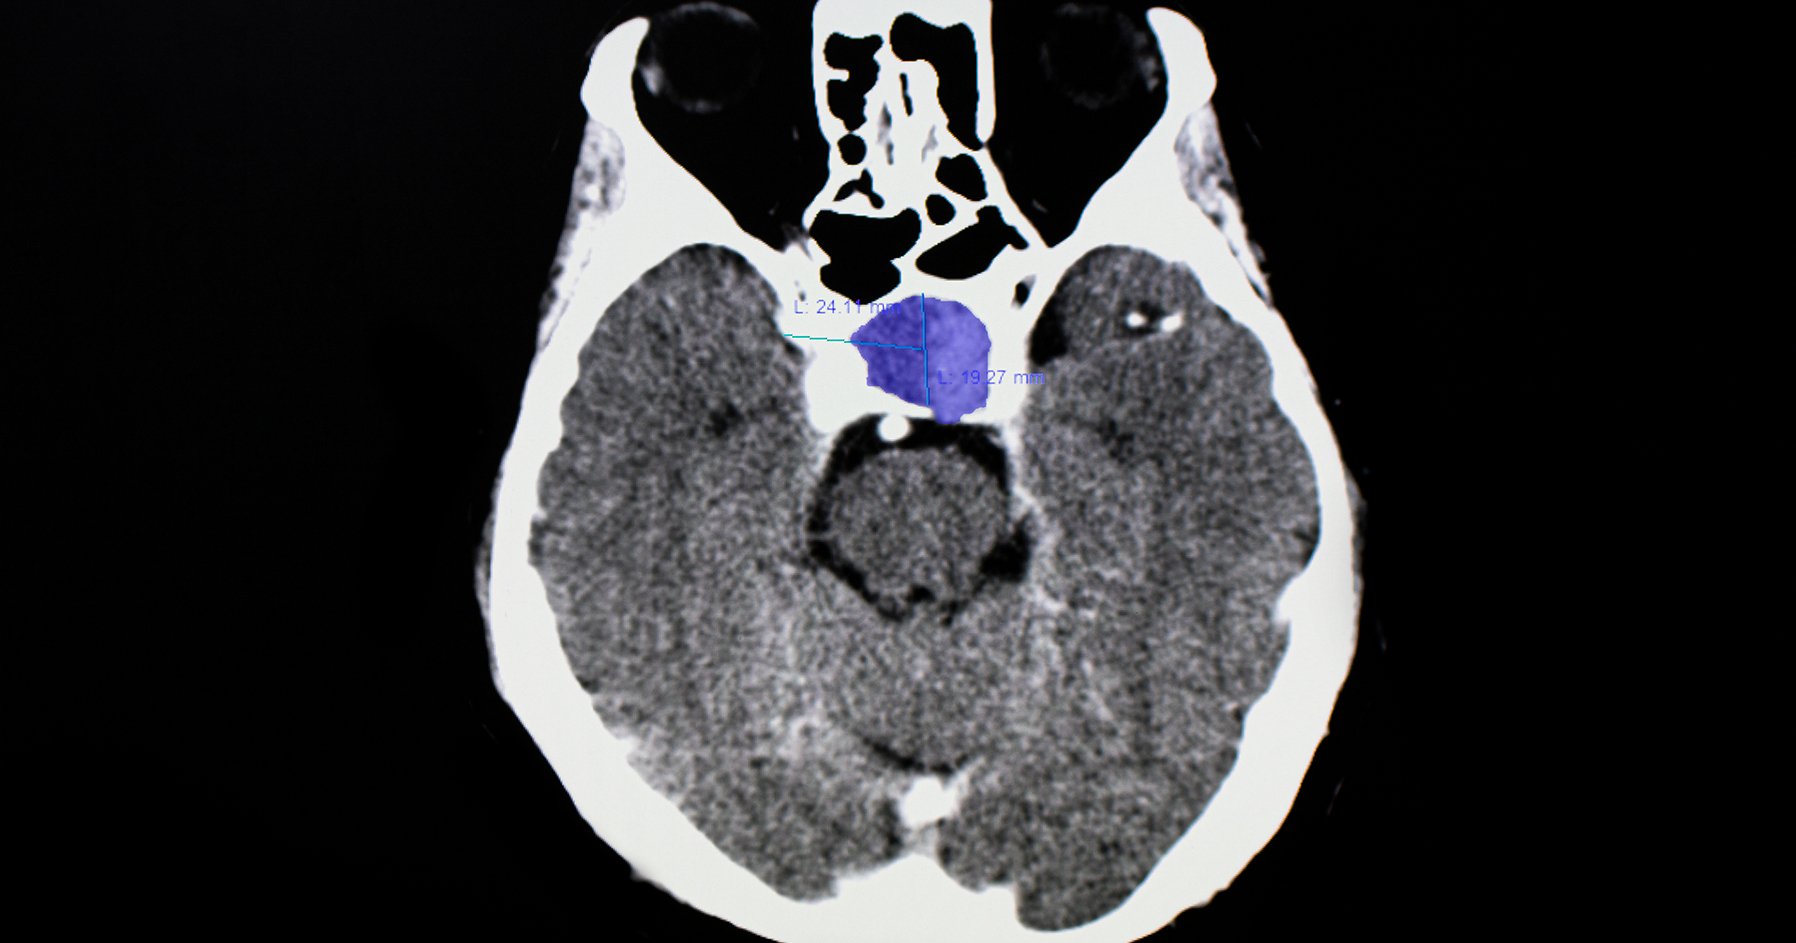 Image of a pituitary tumor in human body.